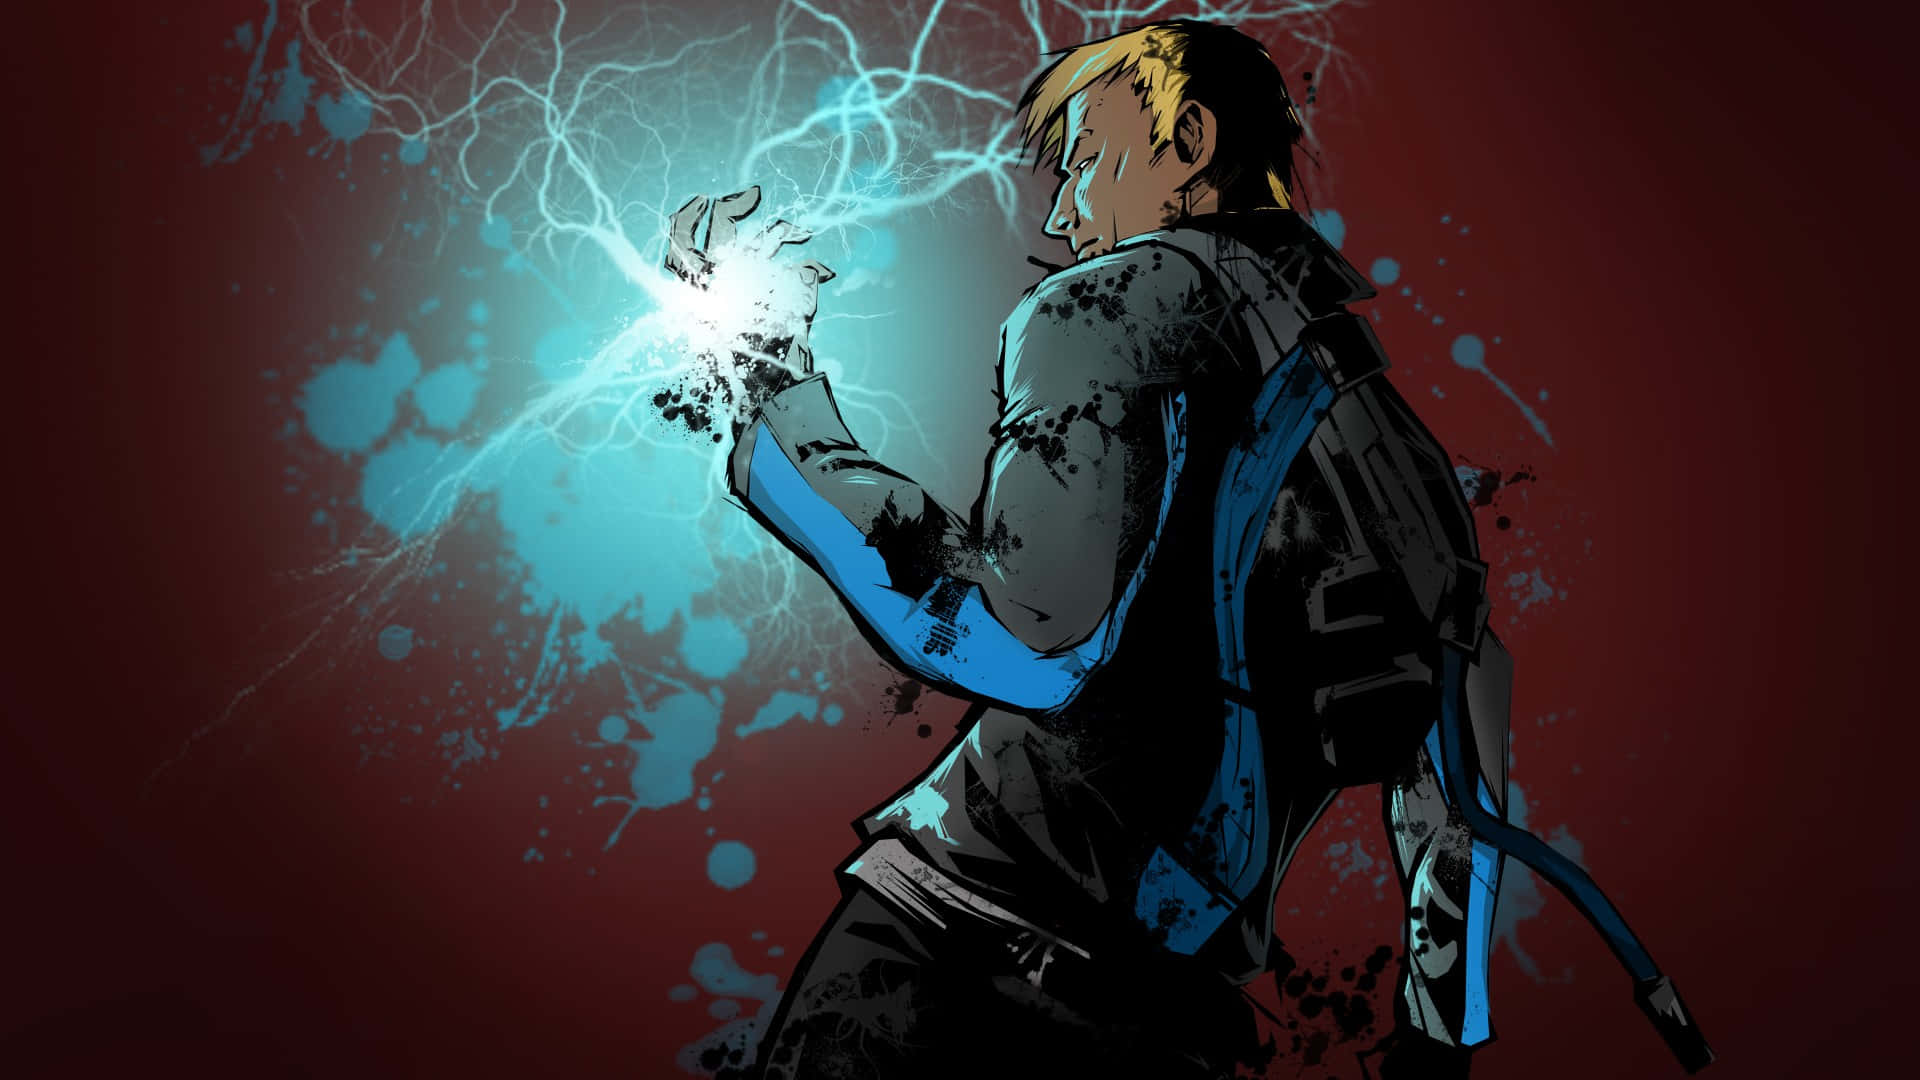 Guy Character In Infamous With Blue Bolt On His Hands Wallpaper